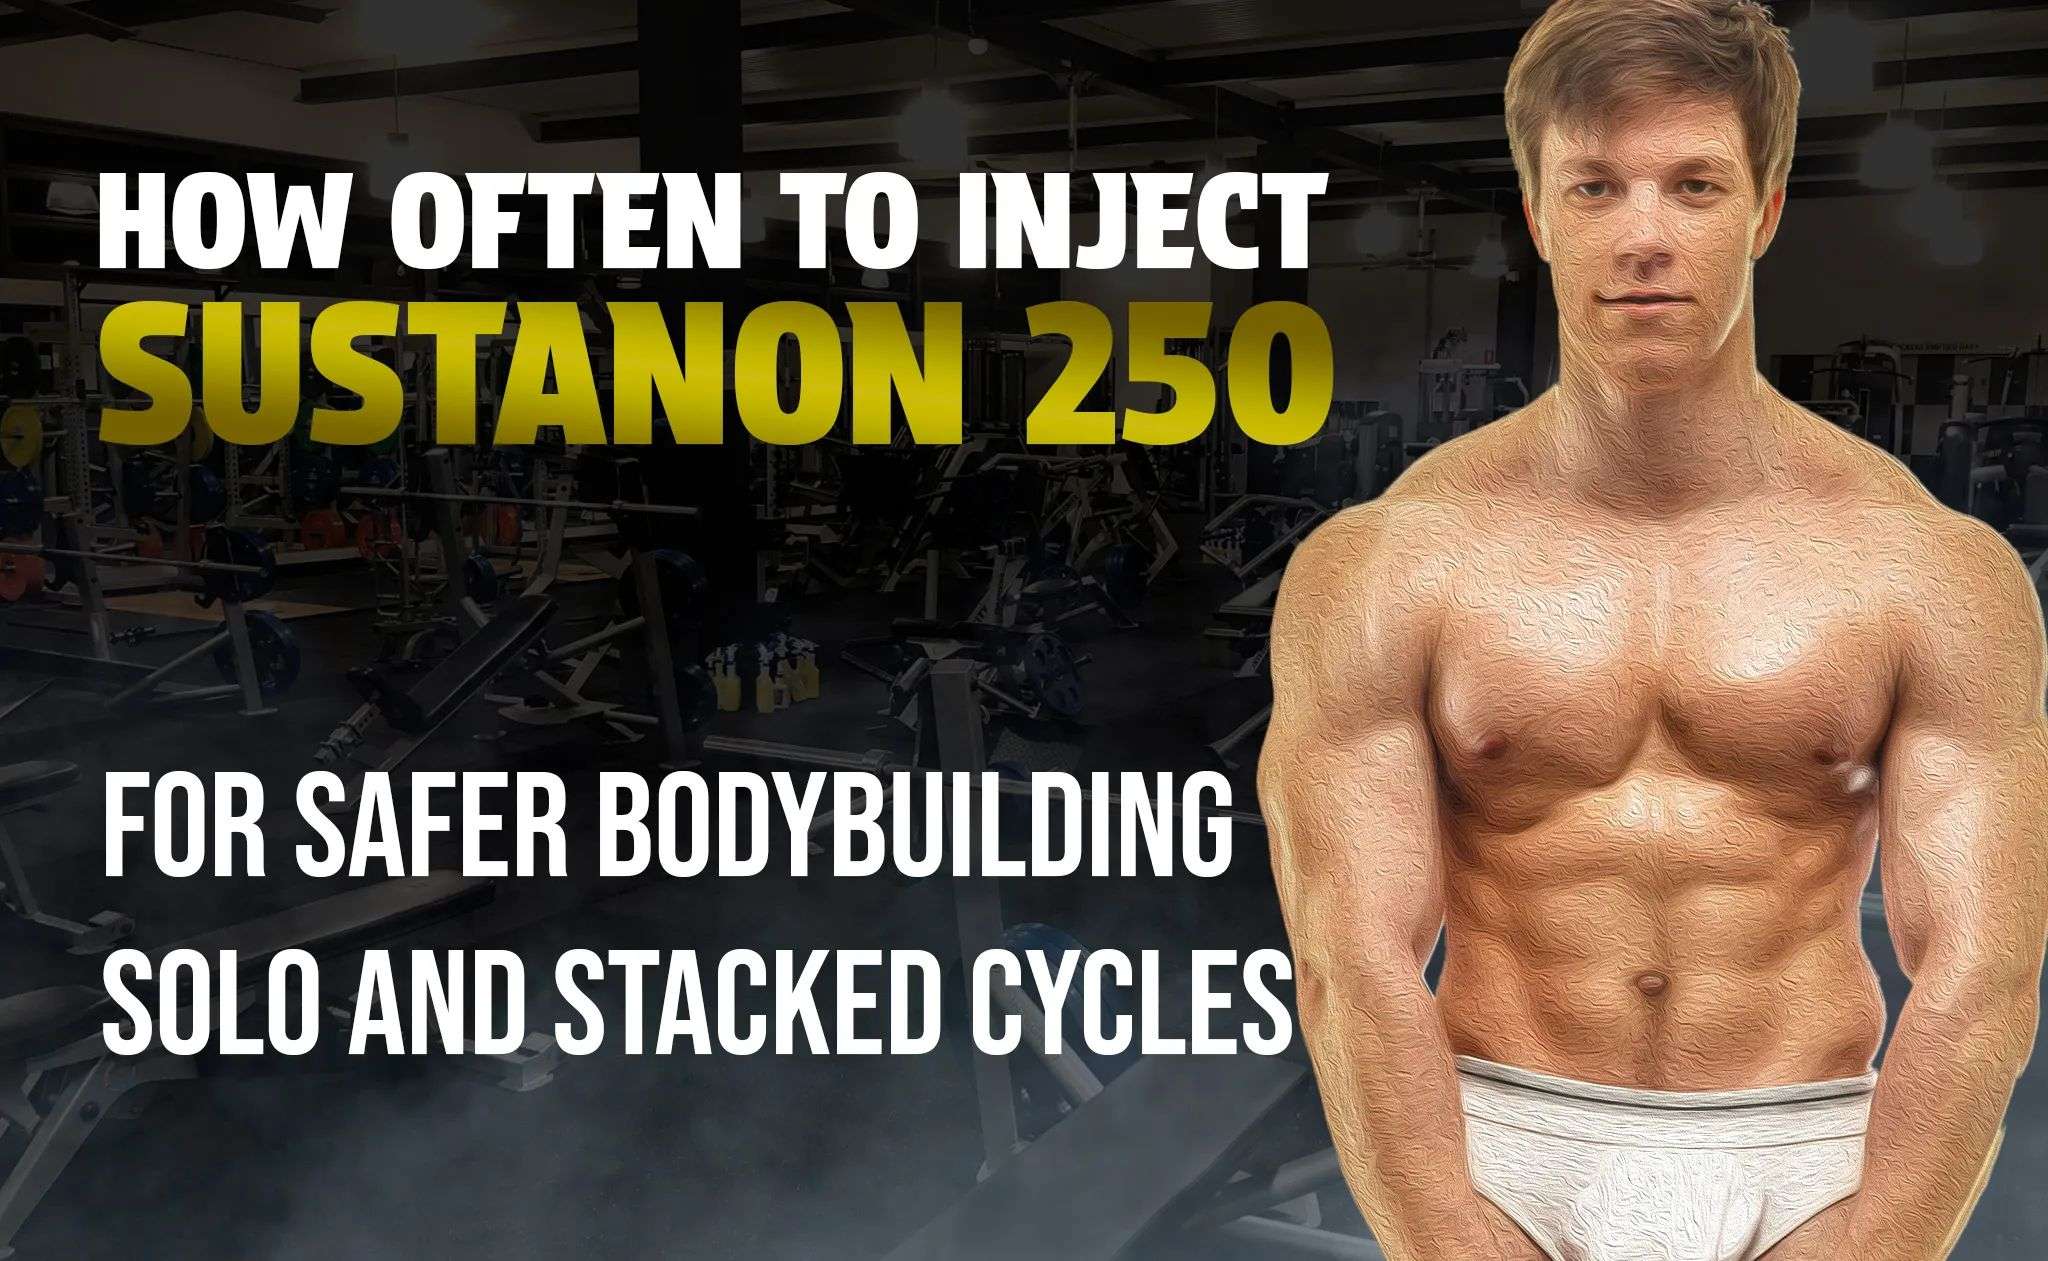 How Often to Inject Sustanon 250 Result